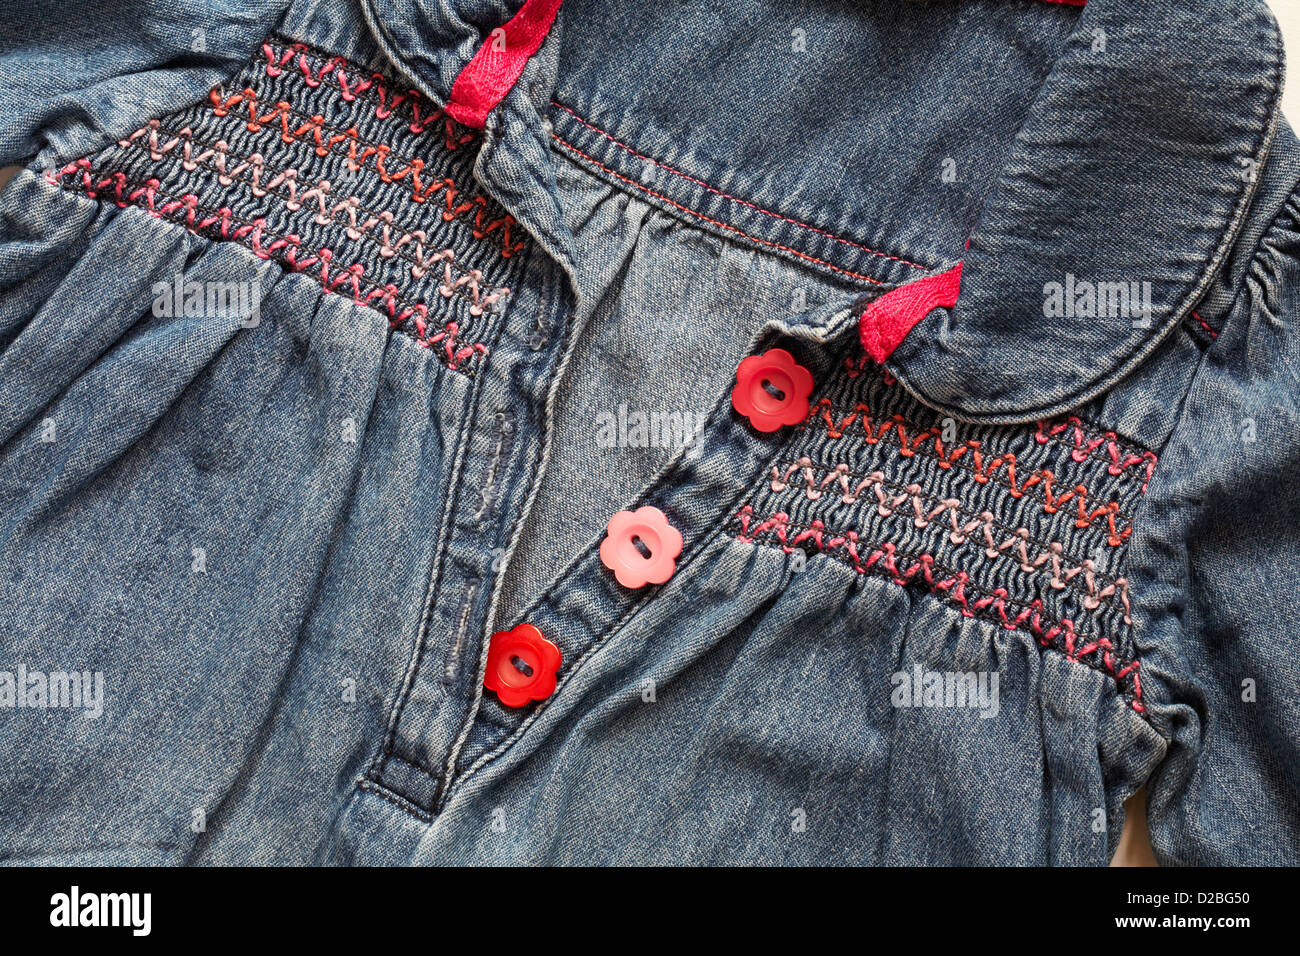 red and pink daisy flower shaped buttons and smocking on little girl's denim smock dress Stock Photo